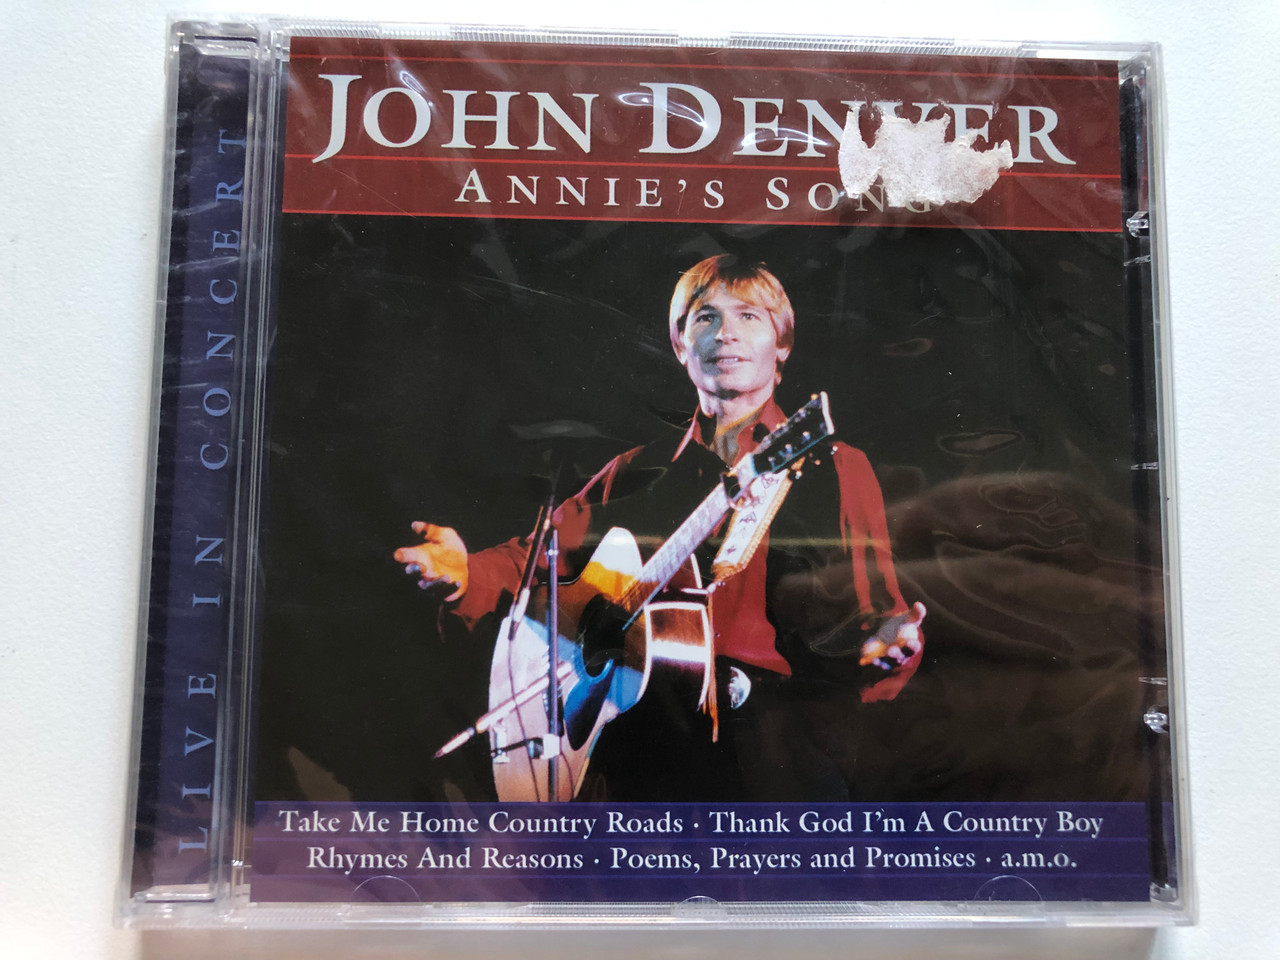 https://cdn10.bigcommerce.com/s-62bdpkt7pb/products/0/images/228264/John_Denver_-_Annies_Song_-_Live_In_Concert_Take_Me_Home_Country_Roads_Thank_God_Im_A_Country_Boy_Rhymes_And_Reasons_Poems_Prayers_and_Promises_a._m._o._Eurotrend_Audio_CD_2003_152_1__38827.1653065585.1280.1280.JPG?c=2&_gl=1*4isay3*_ga*MjA2NTIxMjE2MC4xNTkwNTEyNTMy*_ga_WS2VZYPC6G*MTY1MzA1NDg0MC40MDUuMS4xNjUzMDY1MzcyLjMw